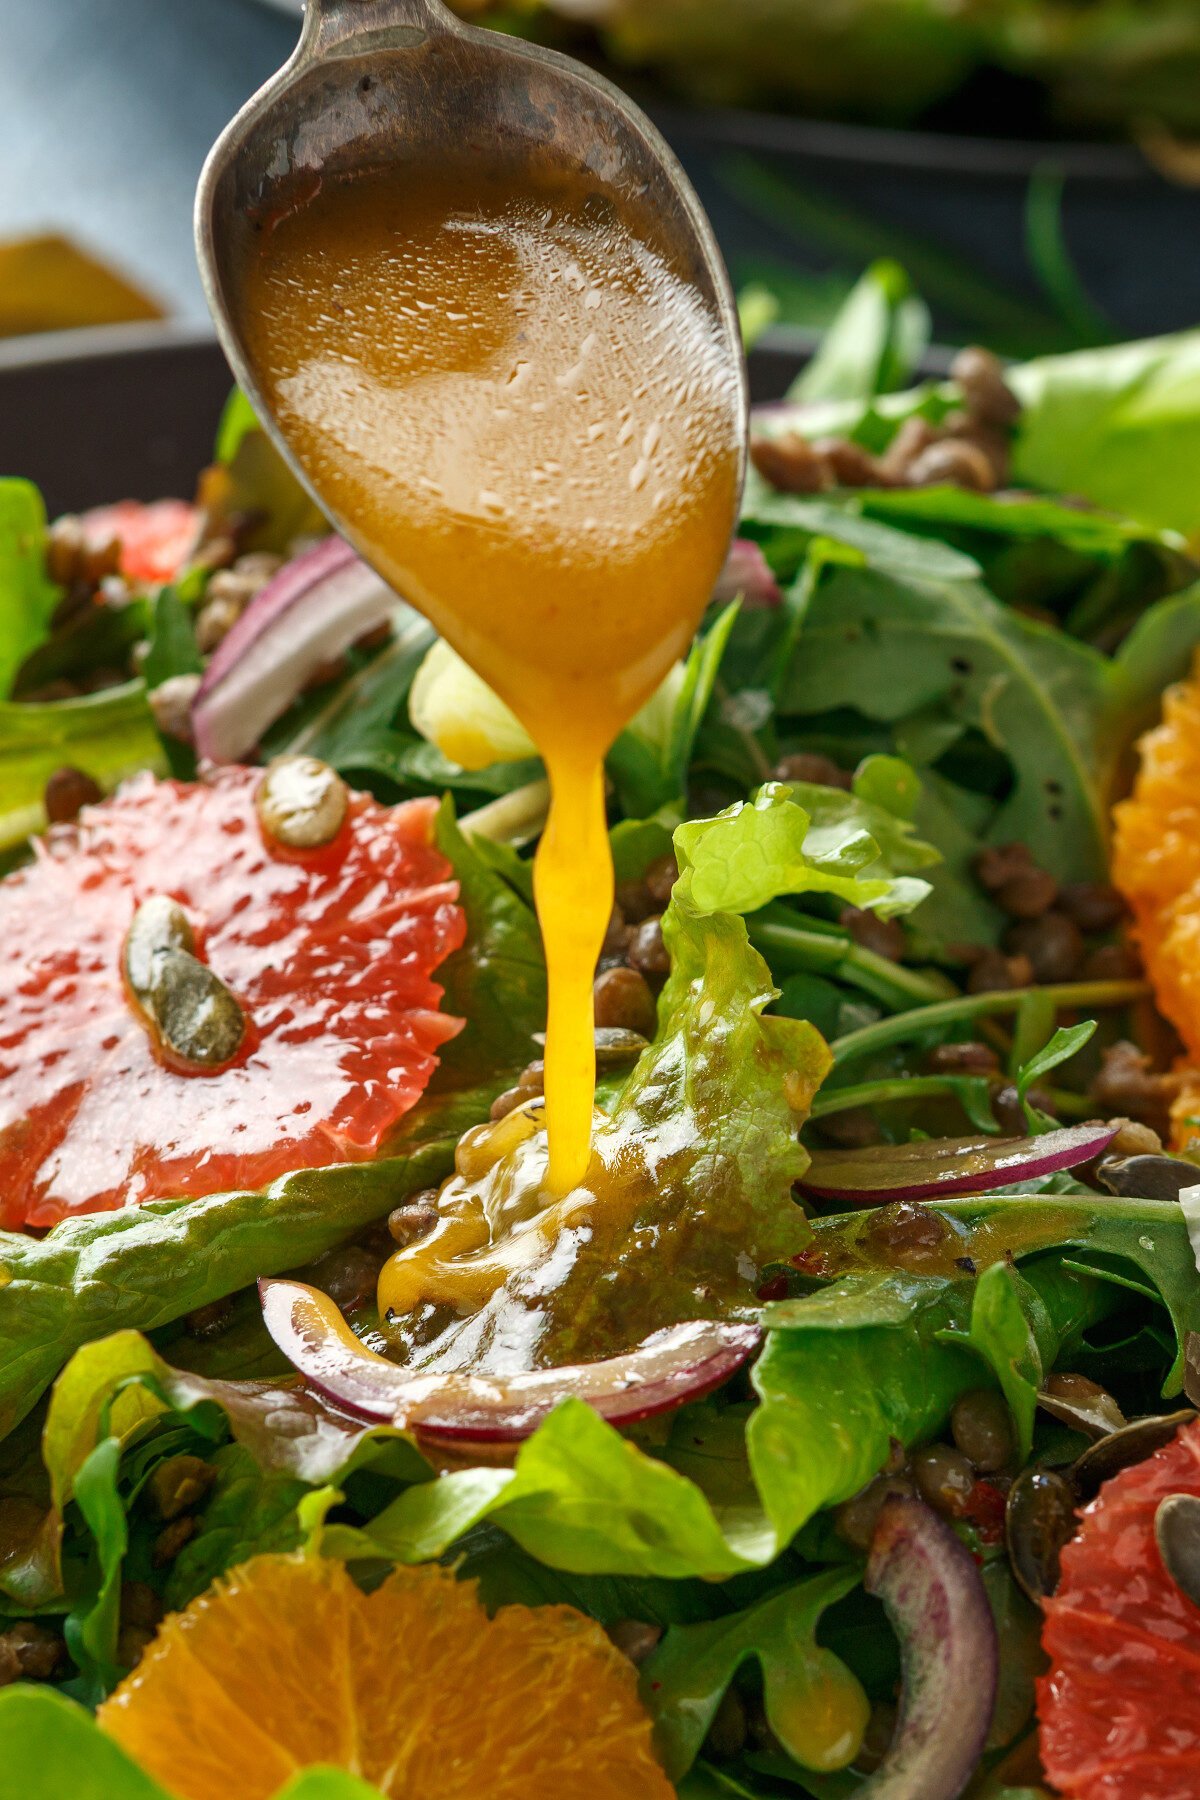 Vertical image of vinaigrette dressing pouring from a spoon onto a fresh fruit salad with mixed greens.